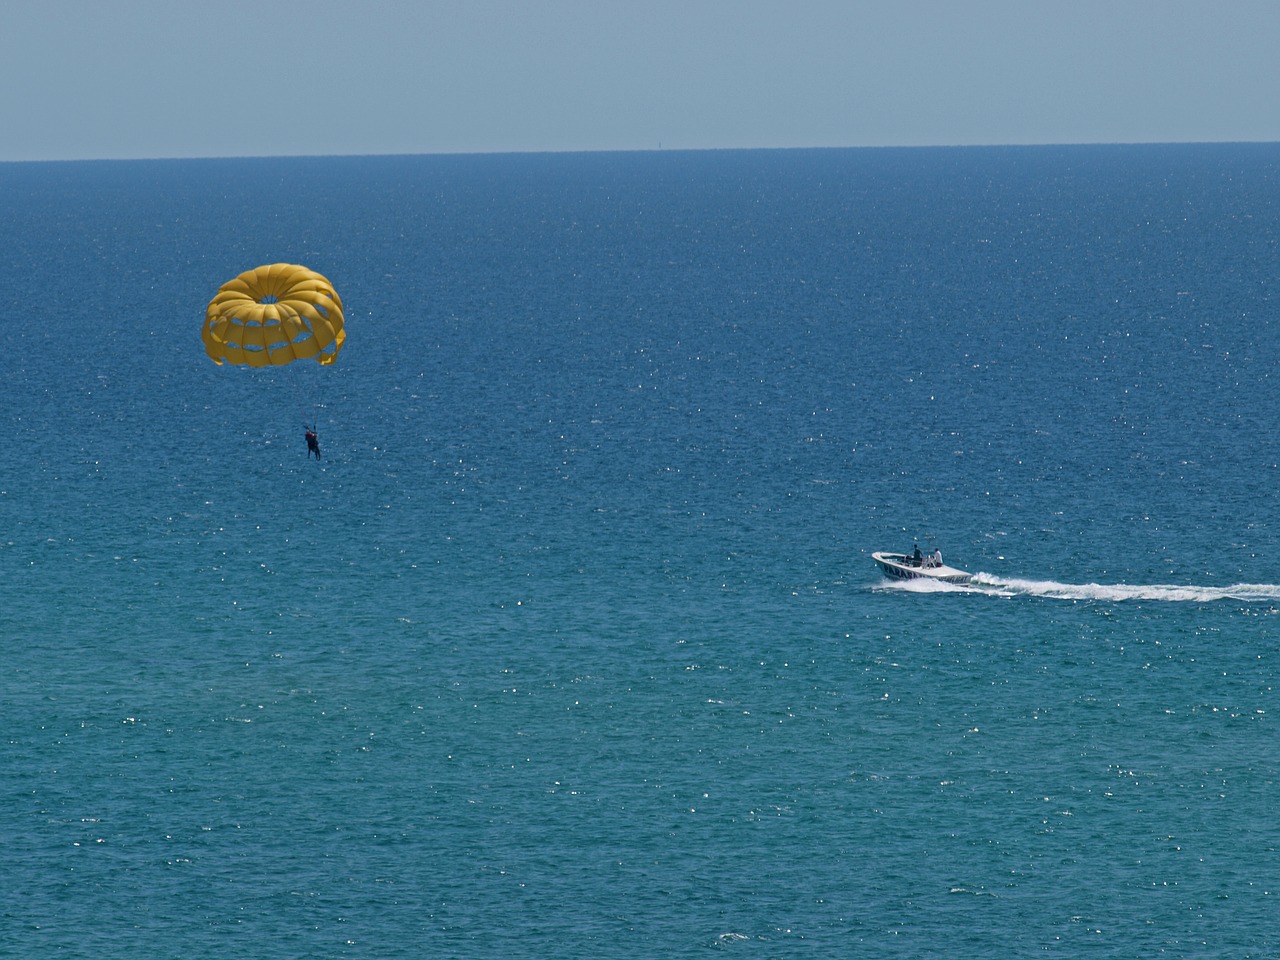 A person parasailing in the ocean with a parachute.